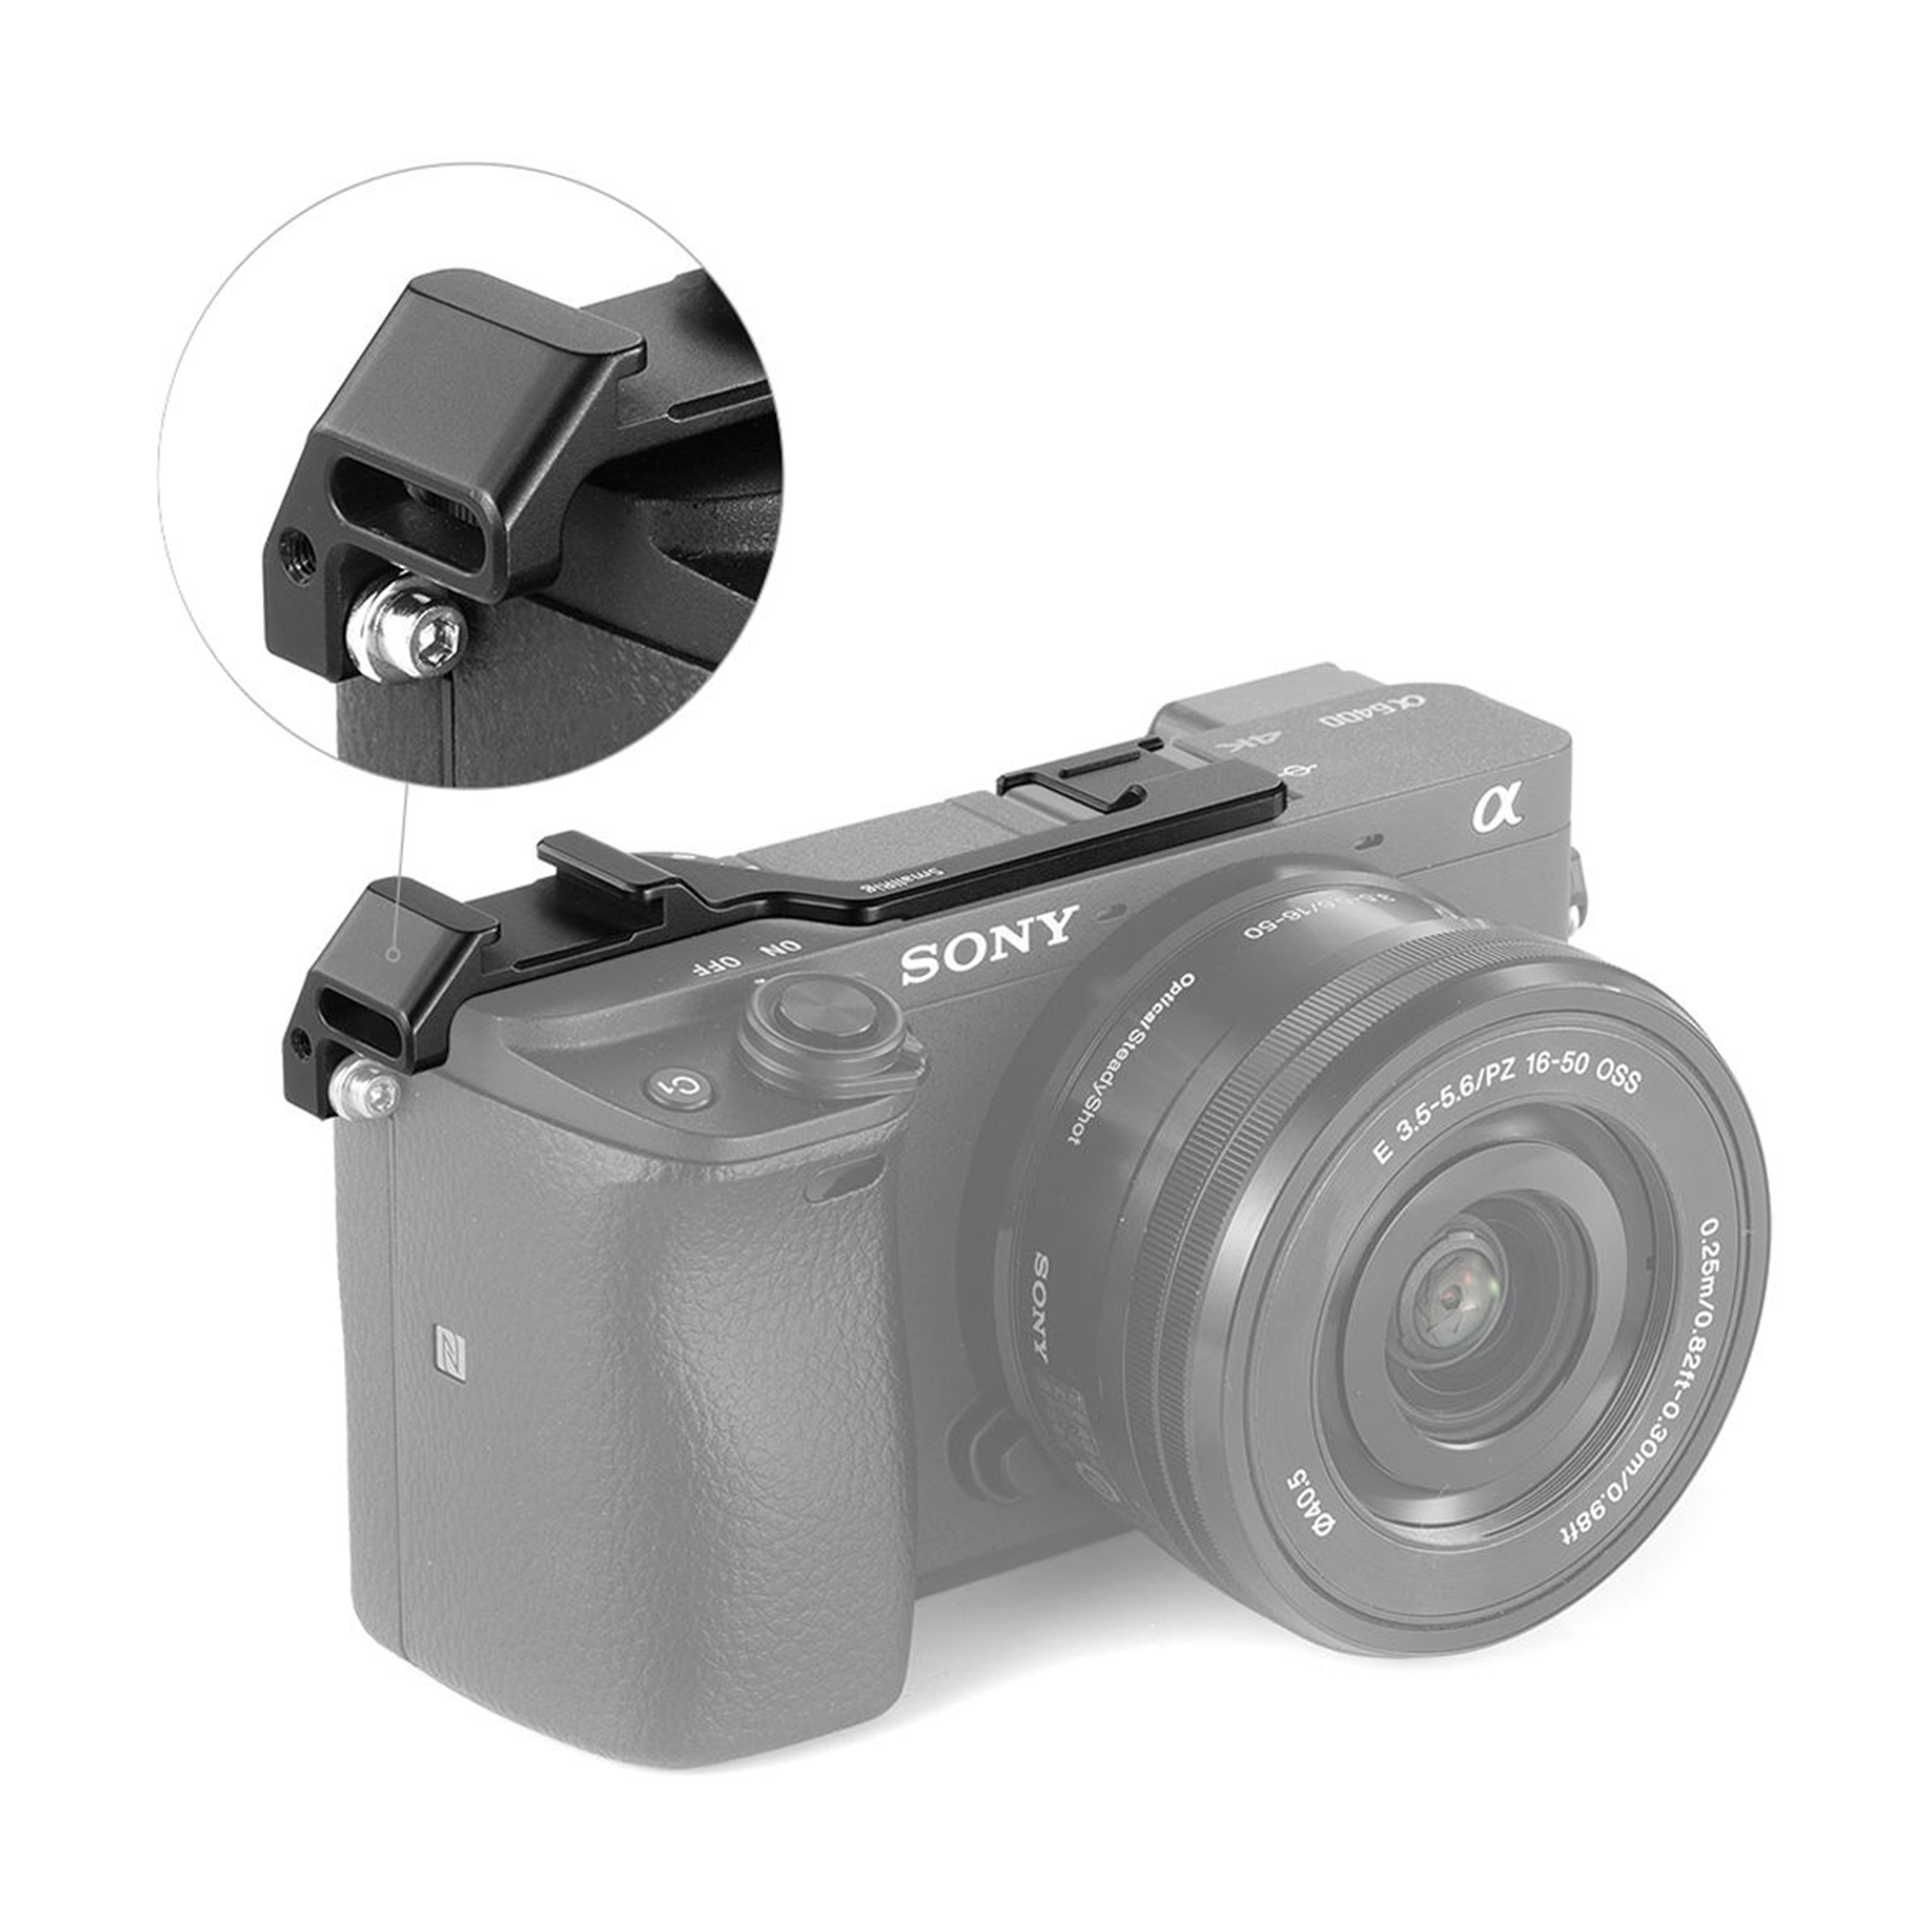 SmallRig Shoe Mount Relocation Plate for Sony a6400/a6300/a6100 Cameras